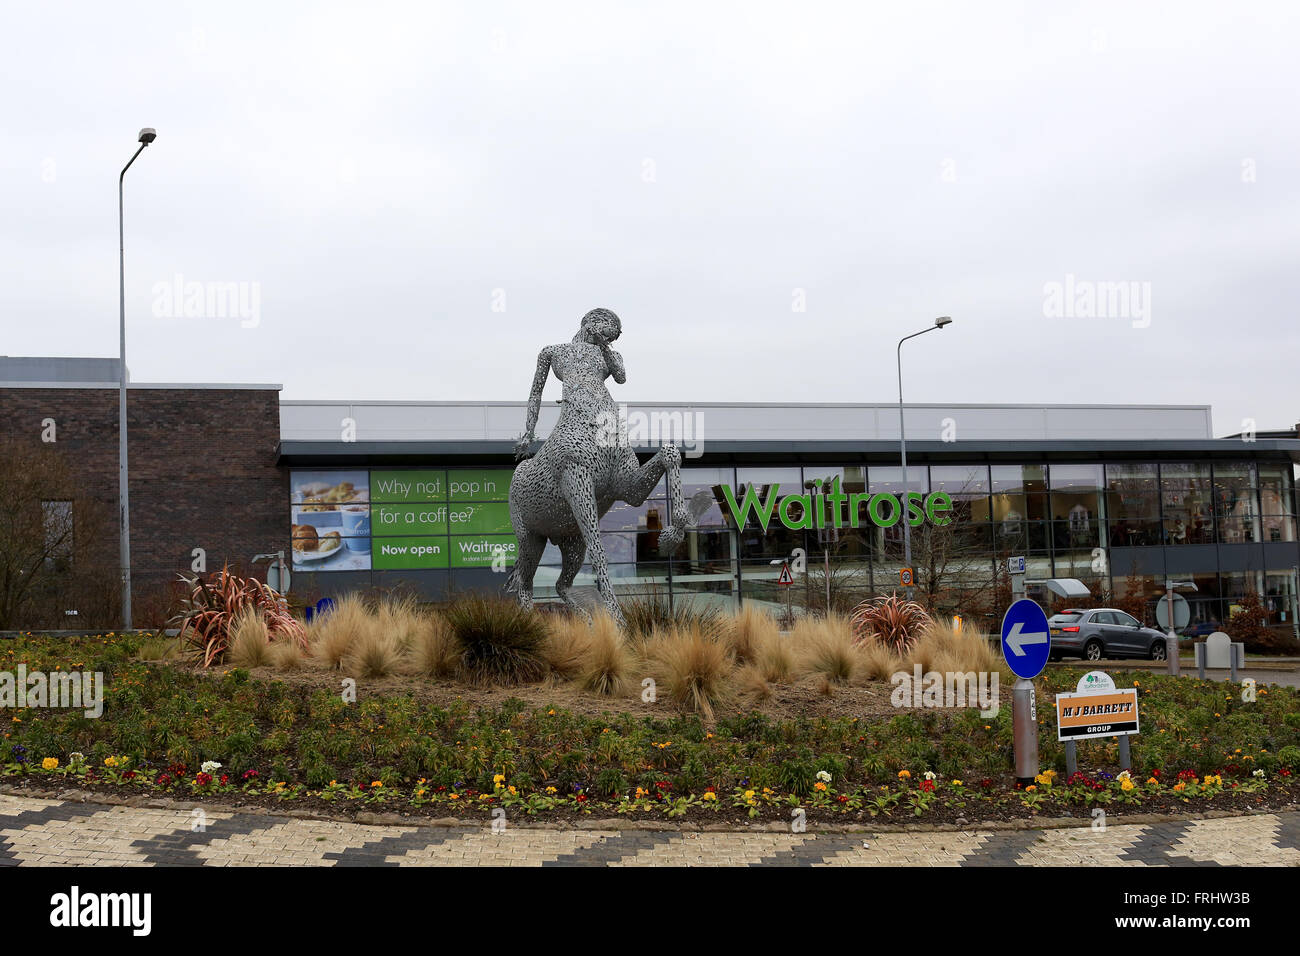 Waitrose store in Uttoxeter, Staffordshire Foto Stock